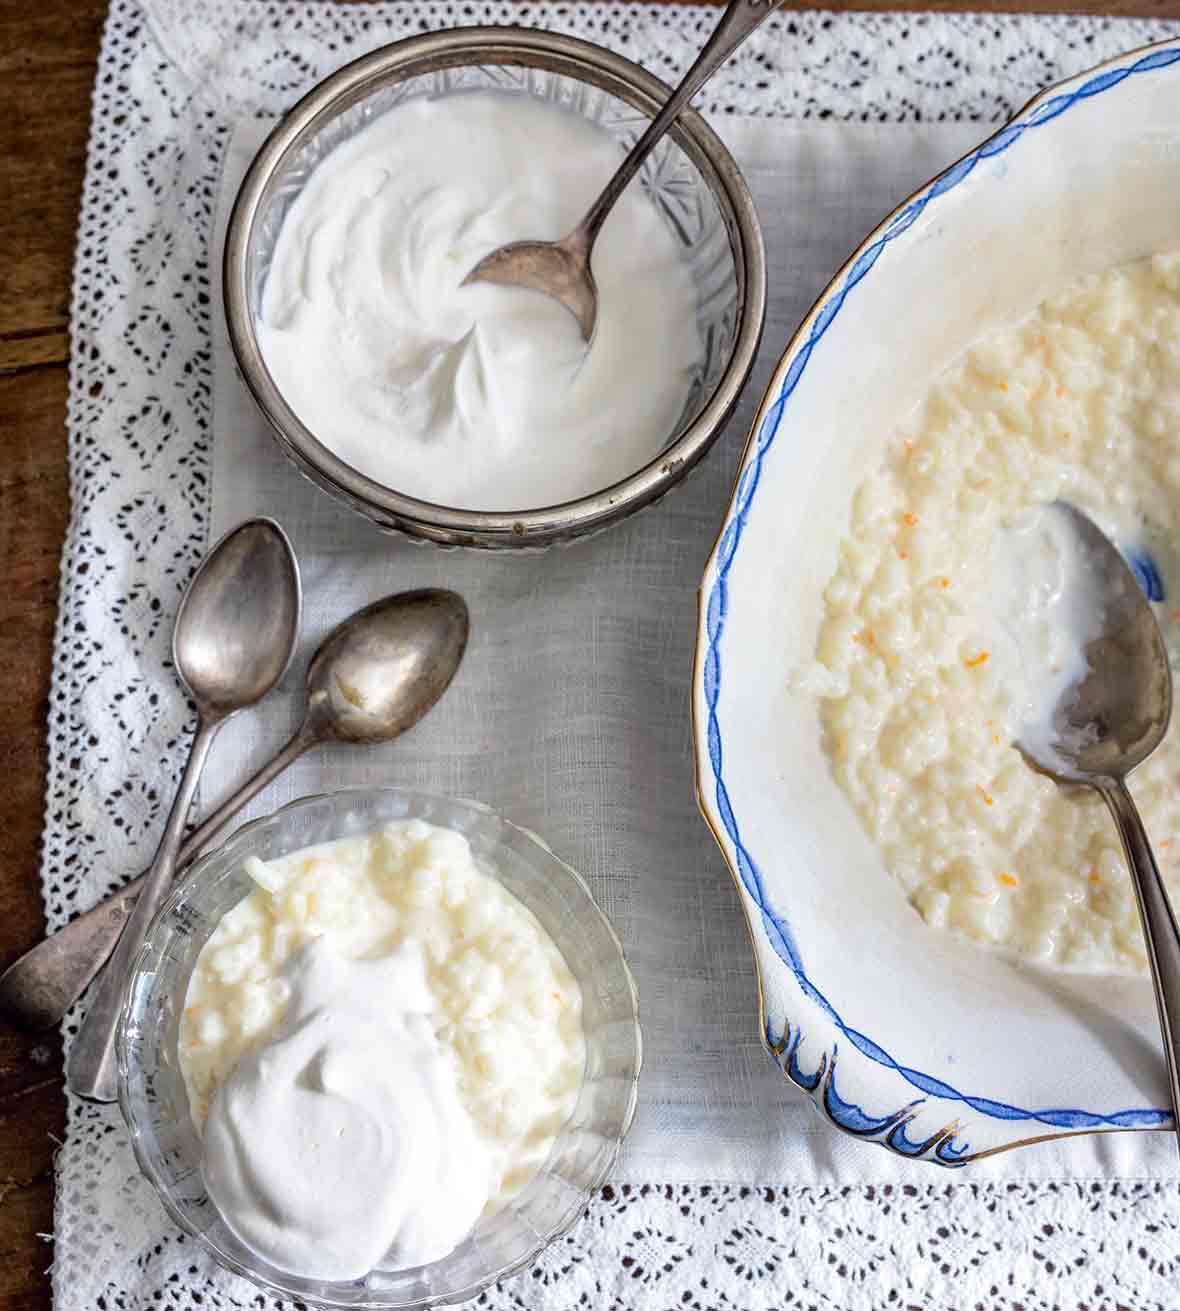 Serving bowl and small bowl of French rice pudding topped with whipped cream, along with spoons on a lace tablecloth.